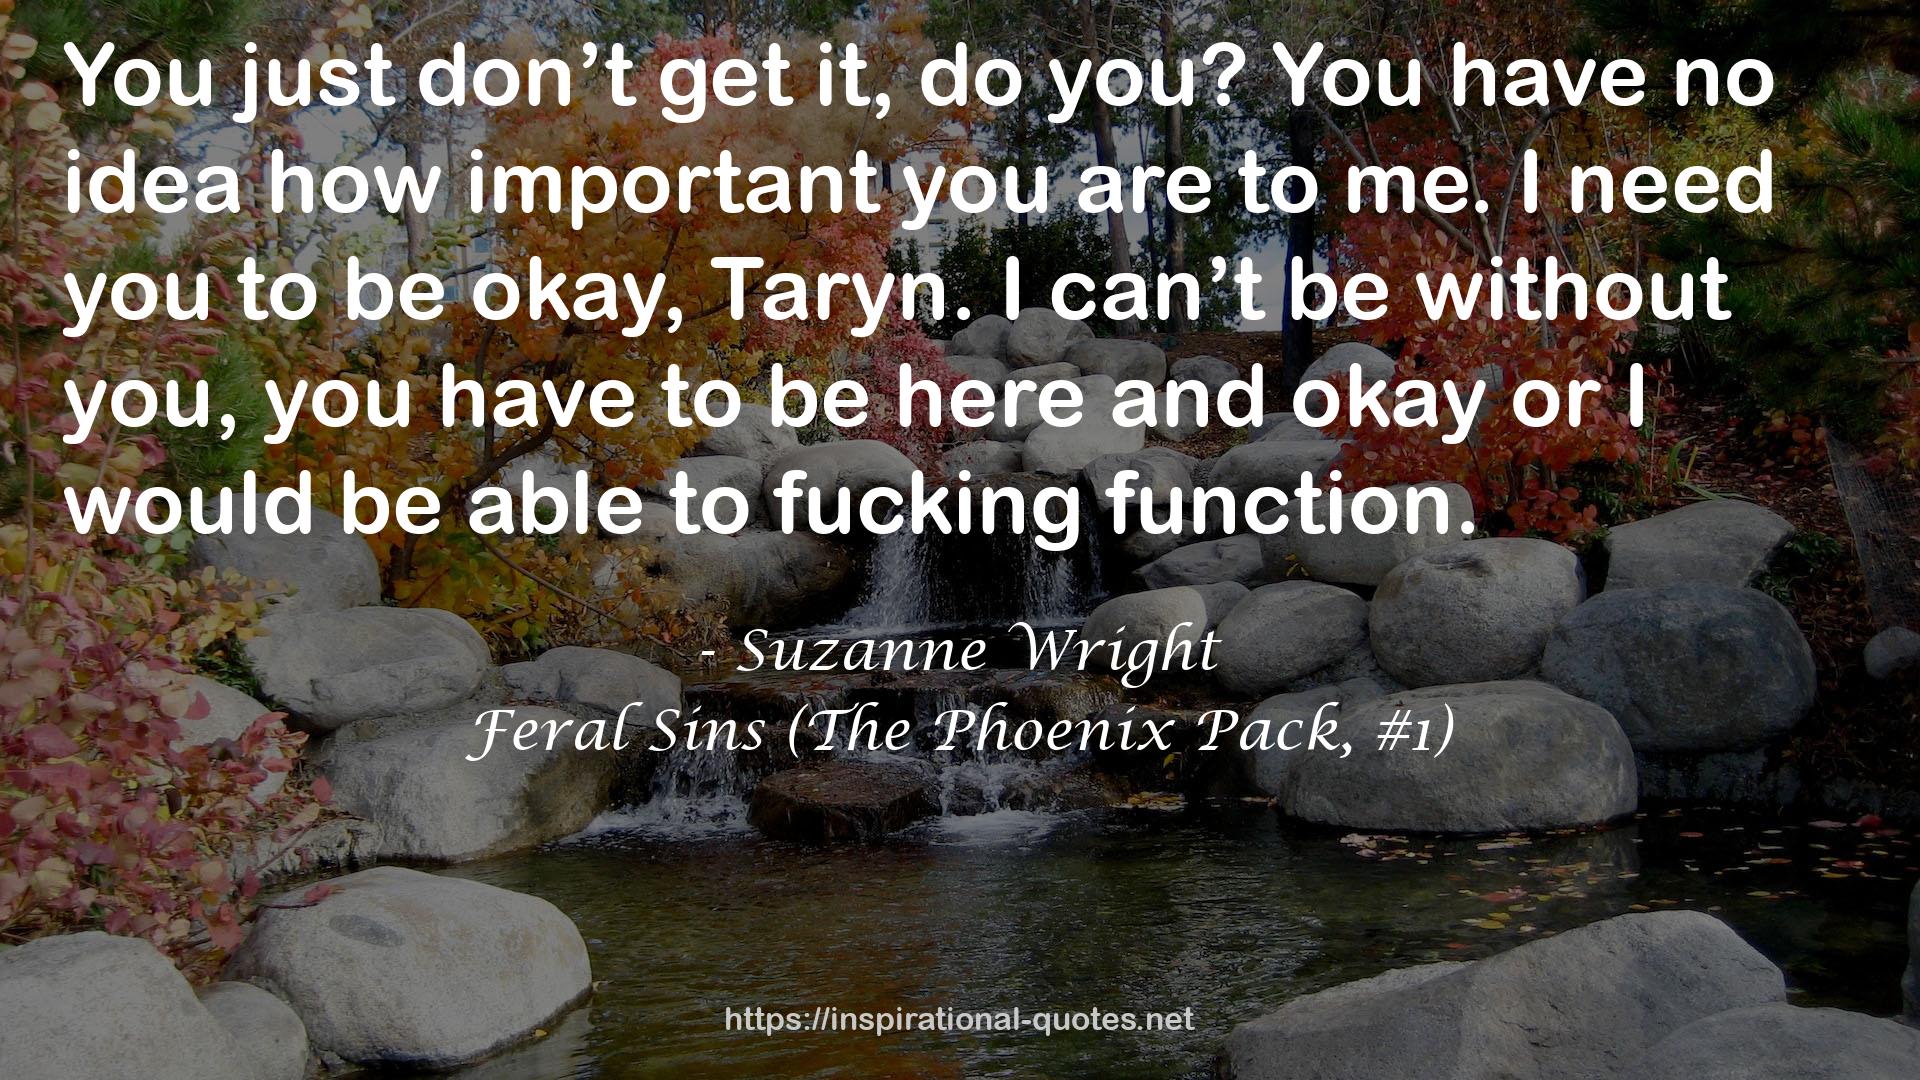 Feral Sins (The Phoenix Pack, #1) QUOTES